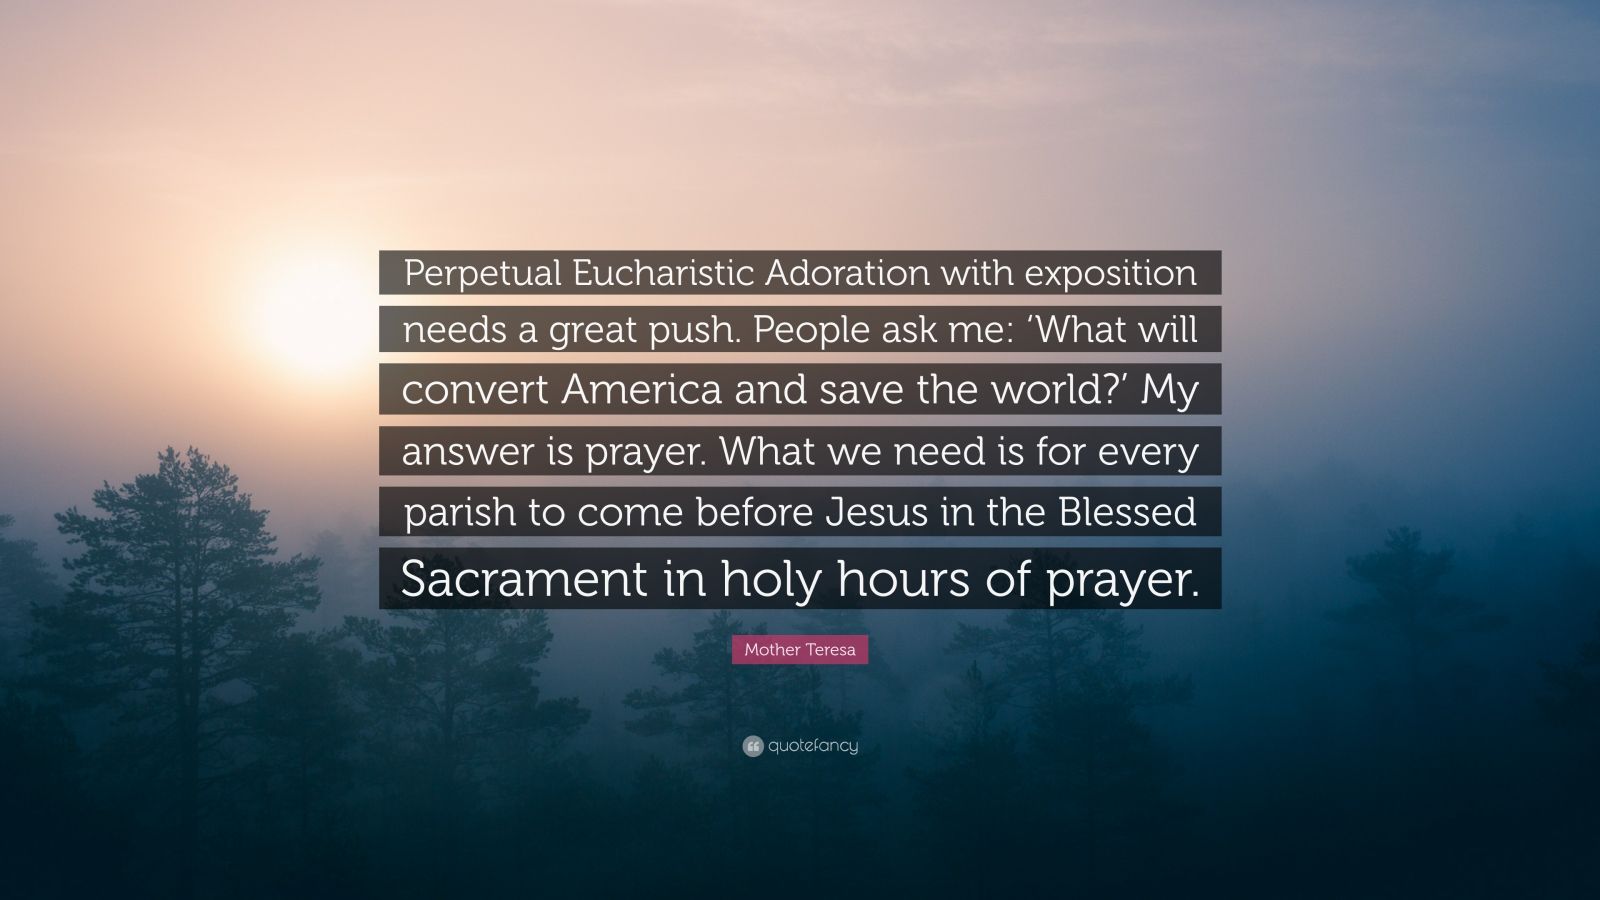 Mother Teresa Quote: “Perpetual Eucharistic Adoration with ...